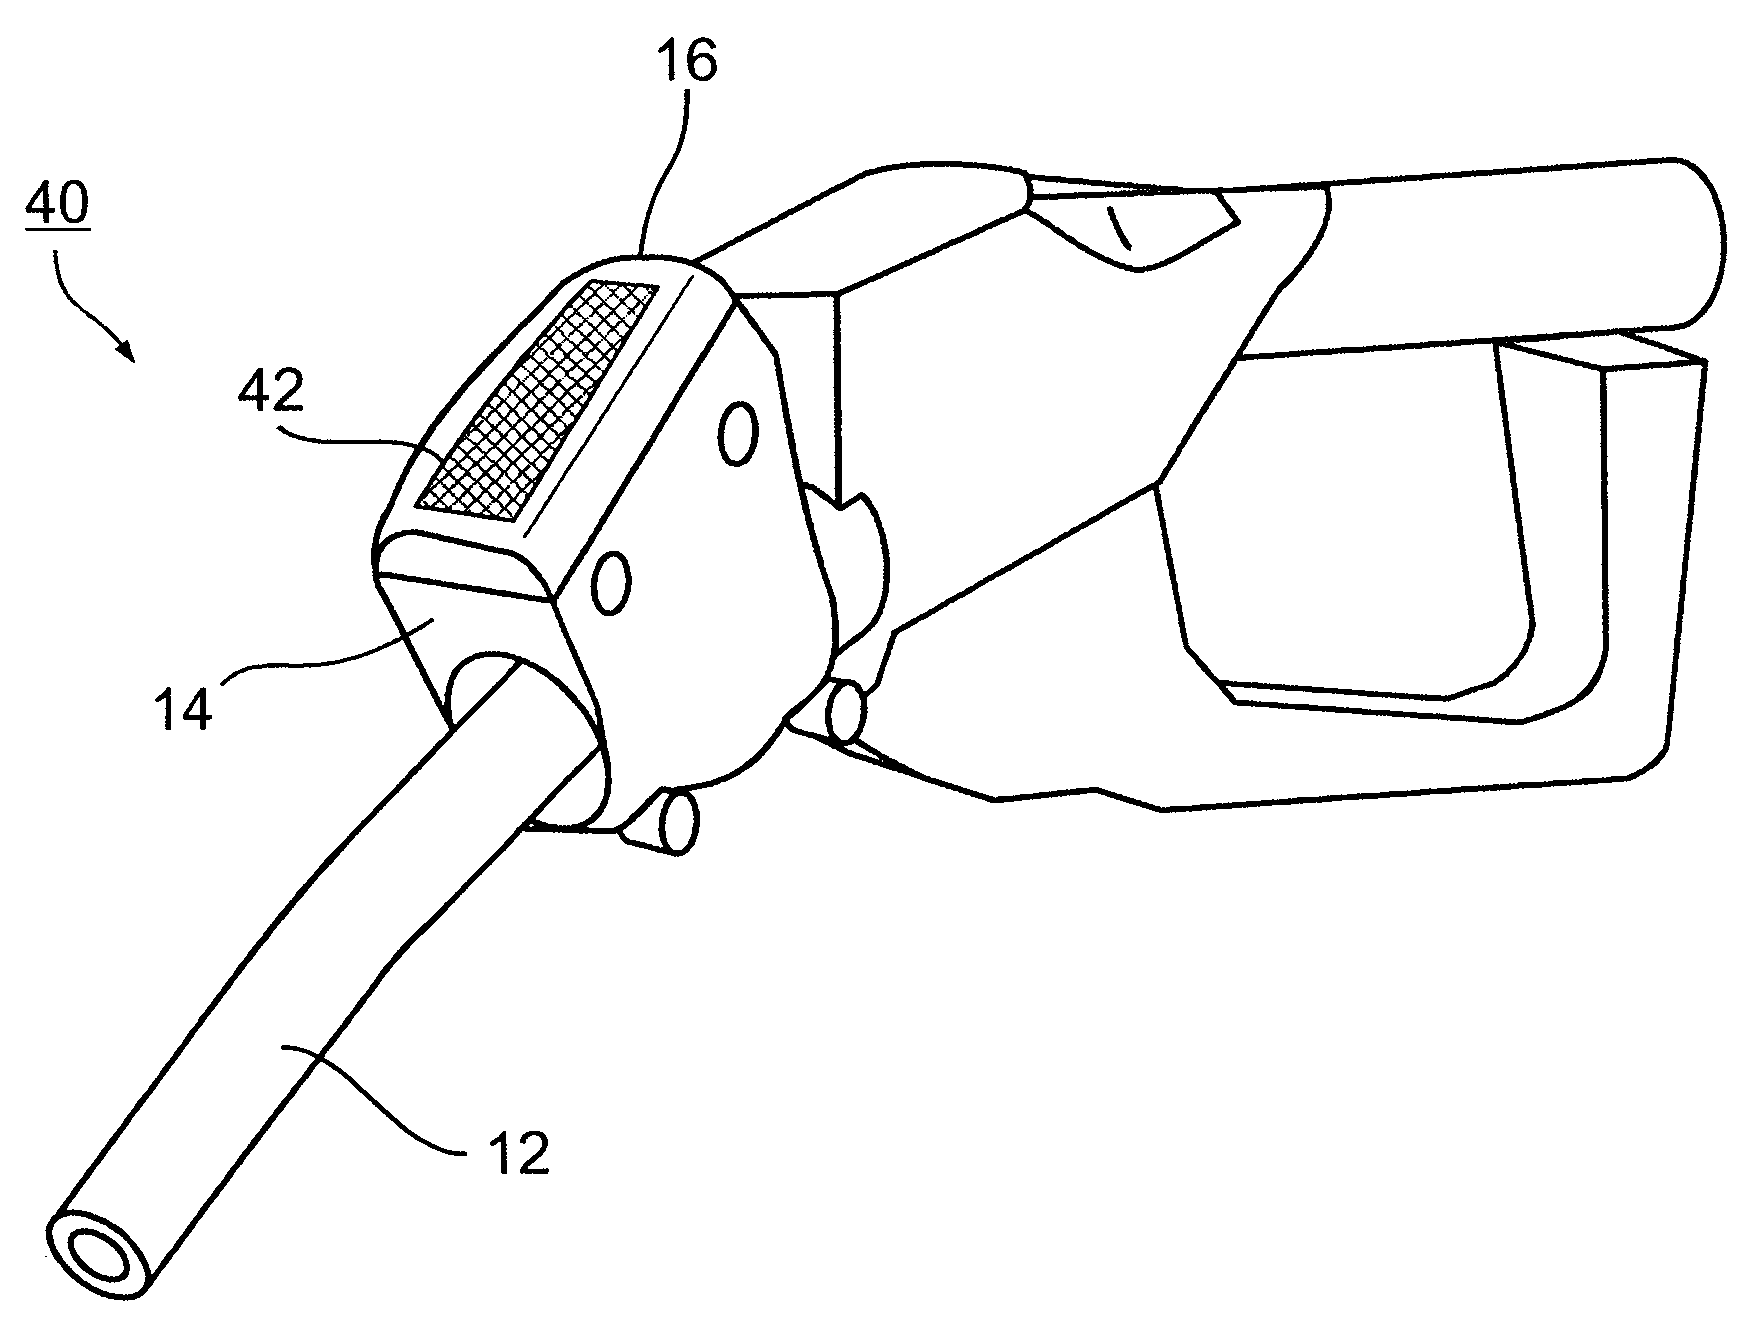 Devices and Methods Useful for Authorizing Purchases Associated with a Vehicle